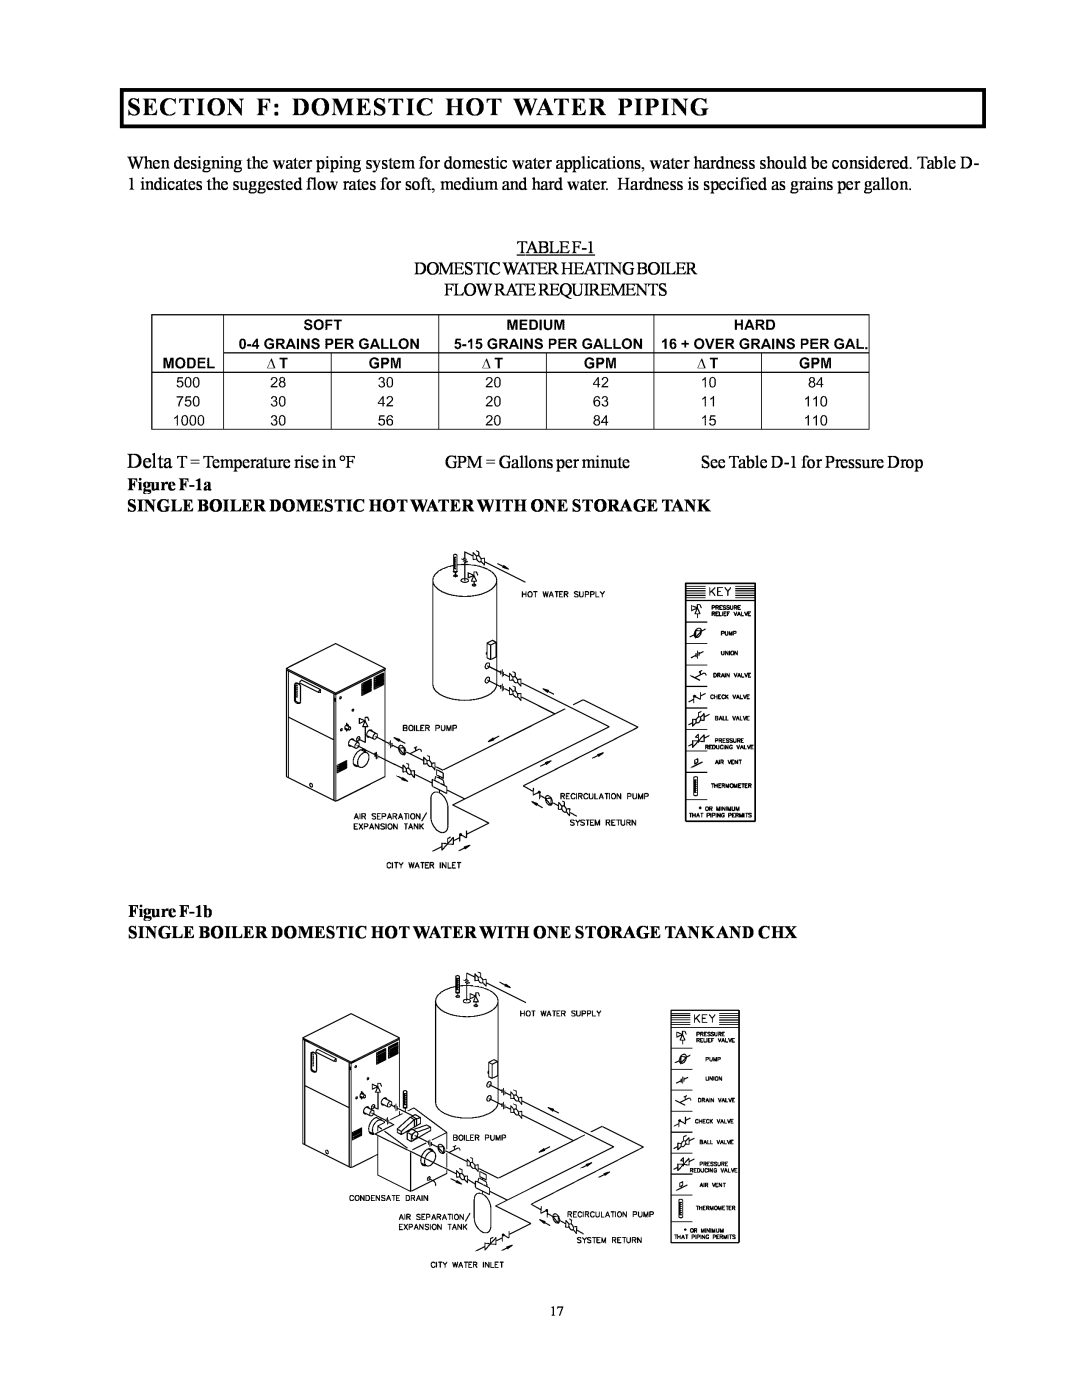 Raypak 1000, 500, 750 installation instructions Section F Domestic Hot Water Piping 